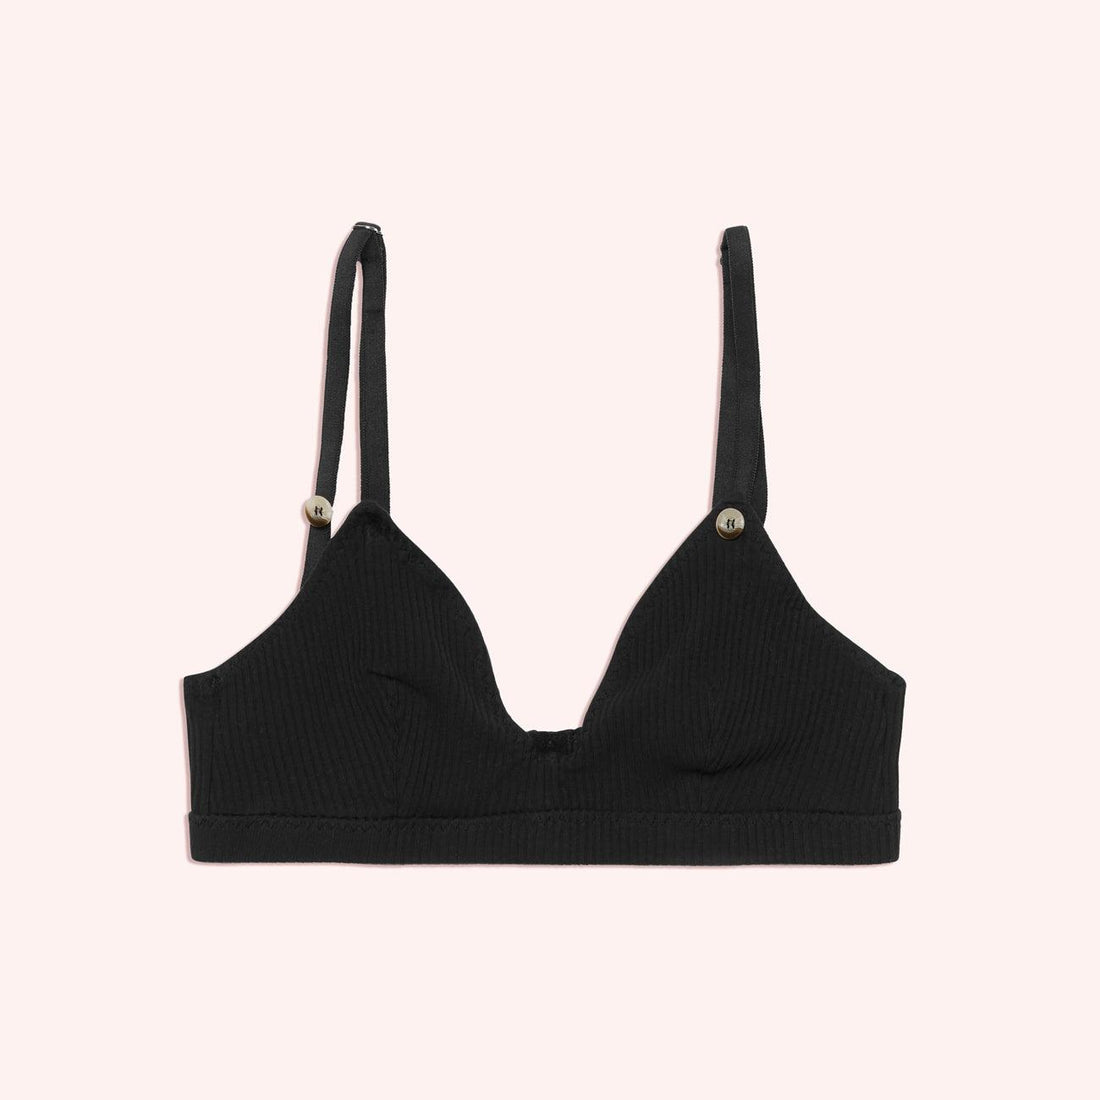 Juem - Up close, the small details with the paloma bra in pumice